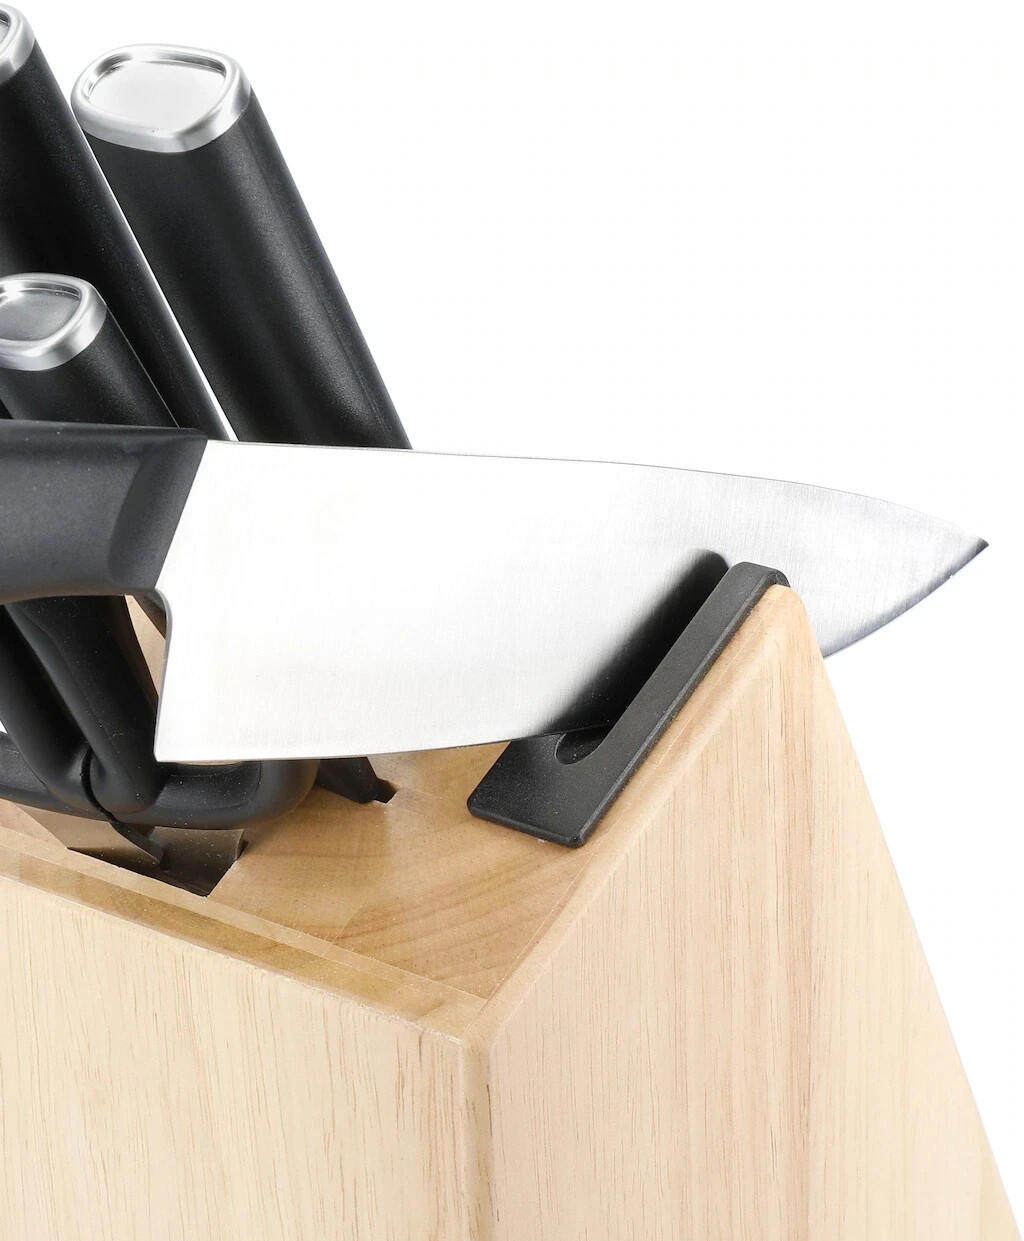 KitchenAid Knife block Classic 6-piece with integrated knife sharpener